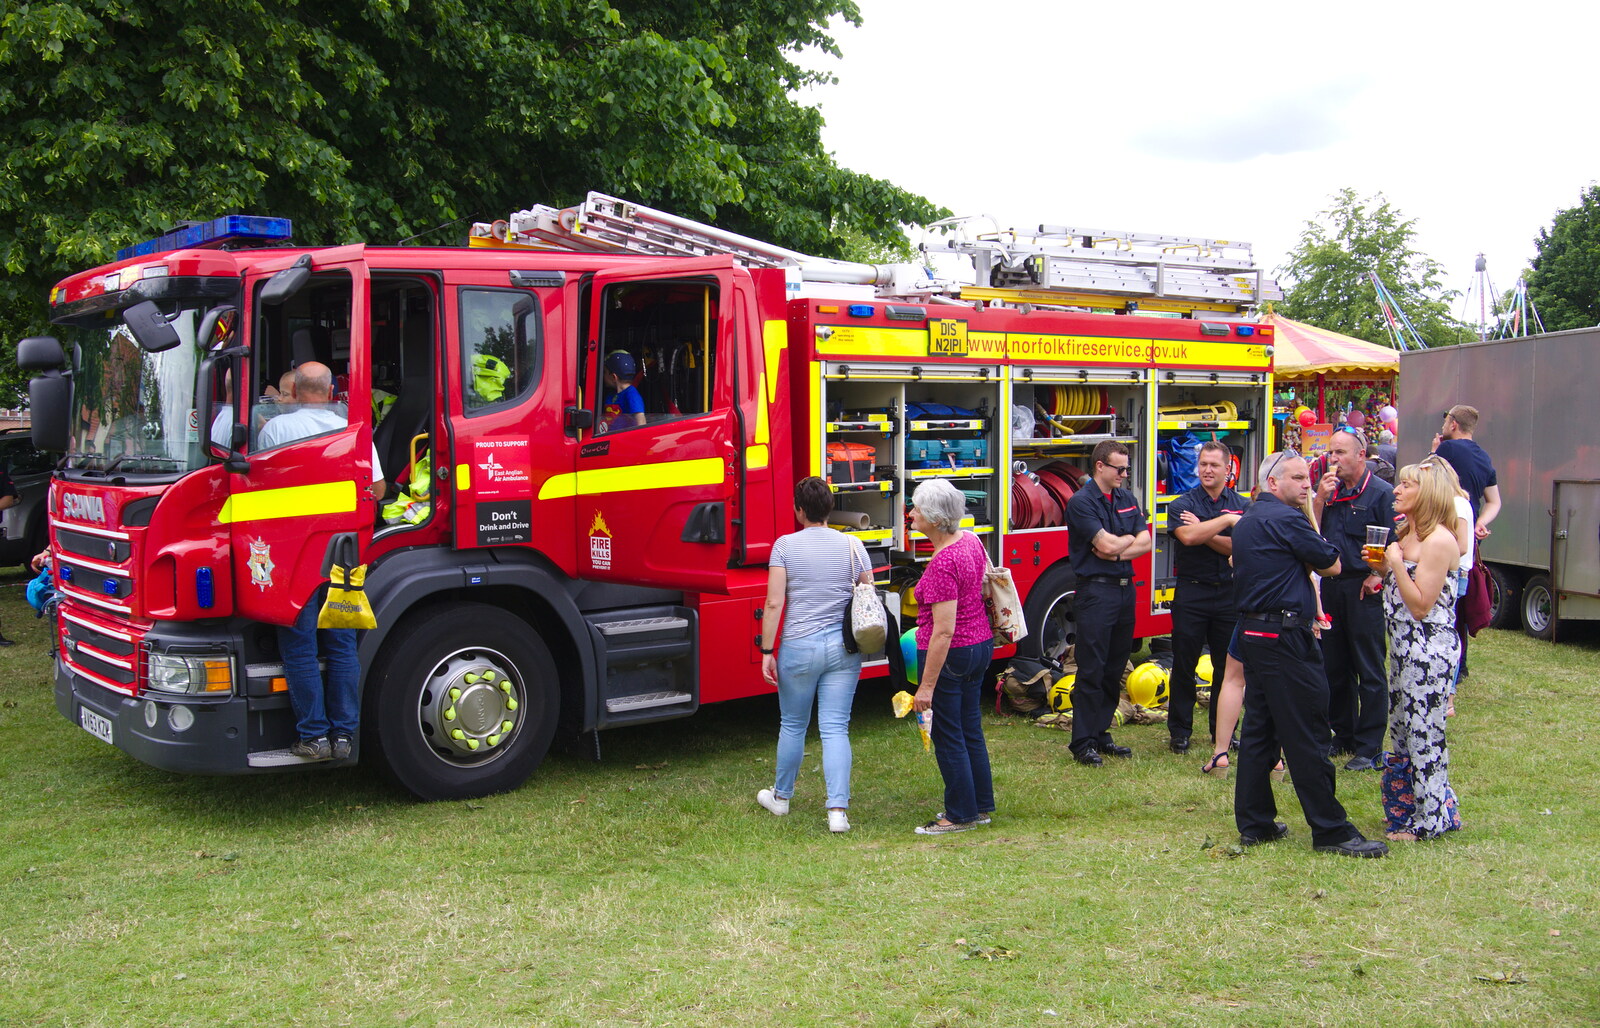 A fire engine is opened up from The Diss Carnival 2019, Diss, Norfolk - 9th June 2019